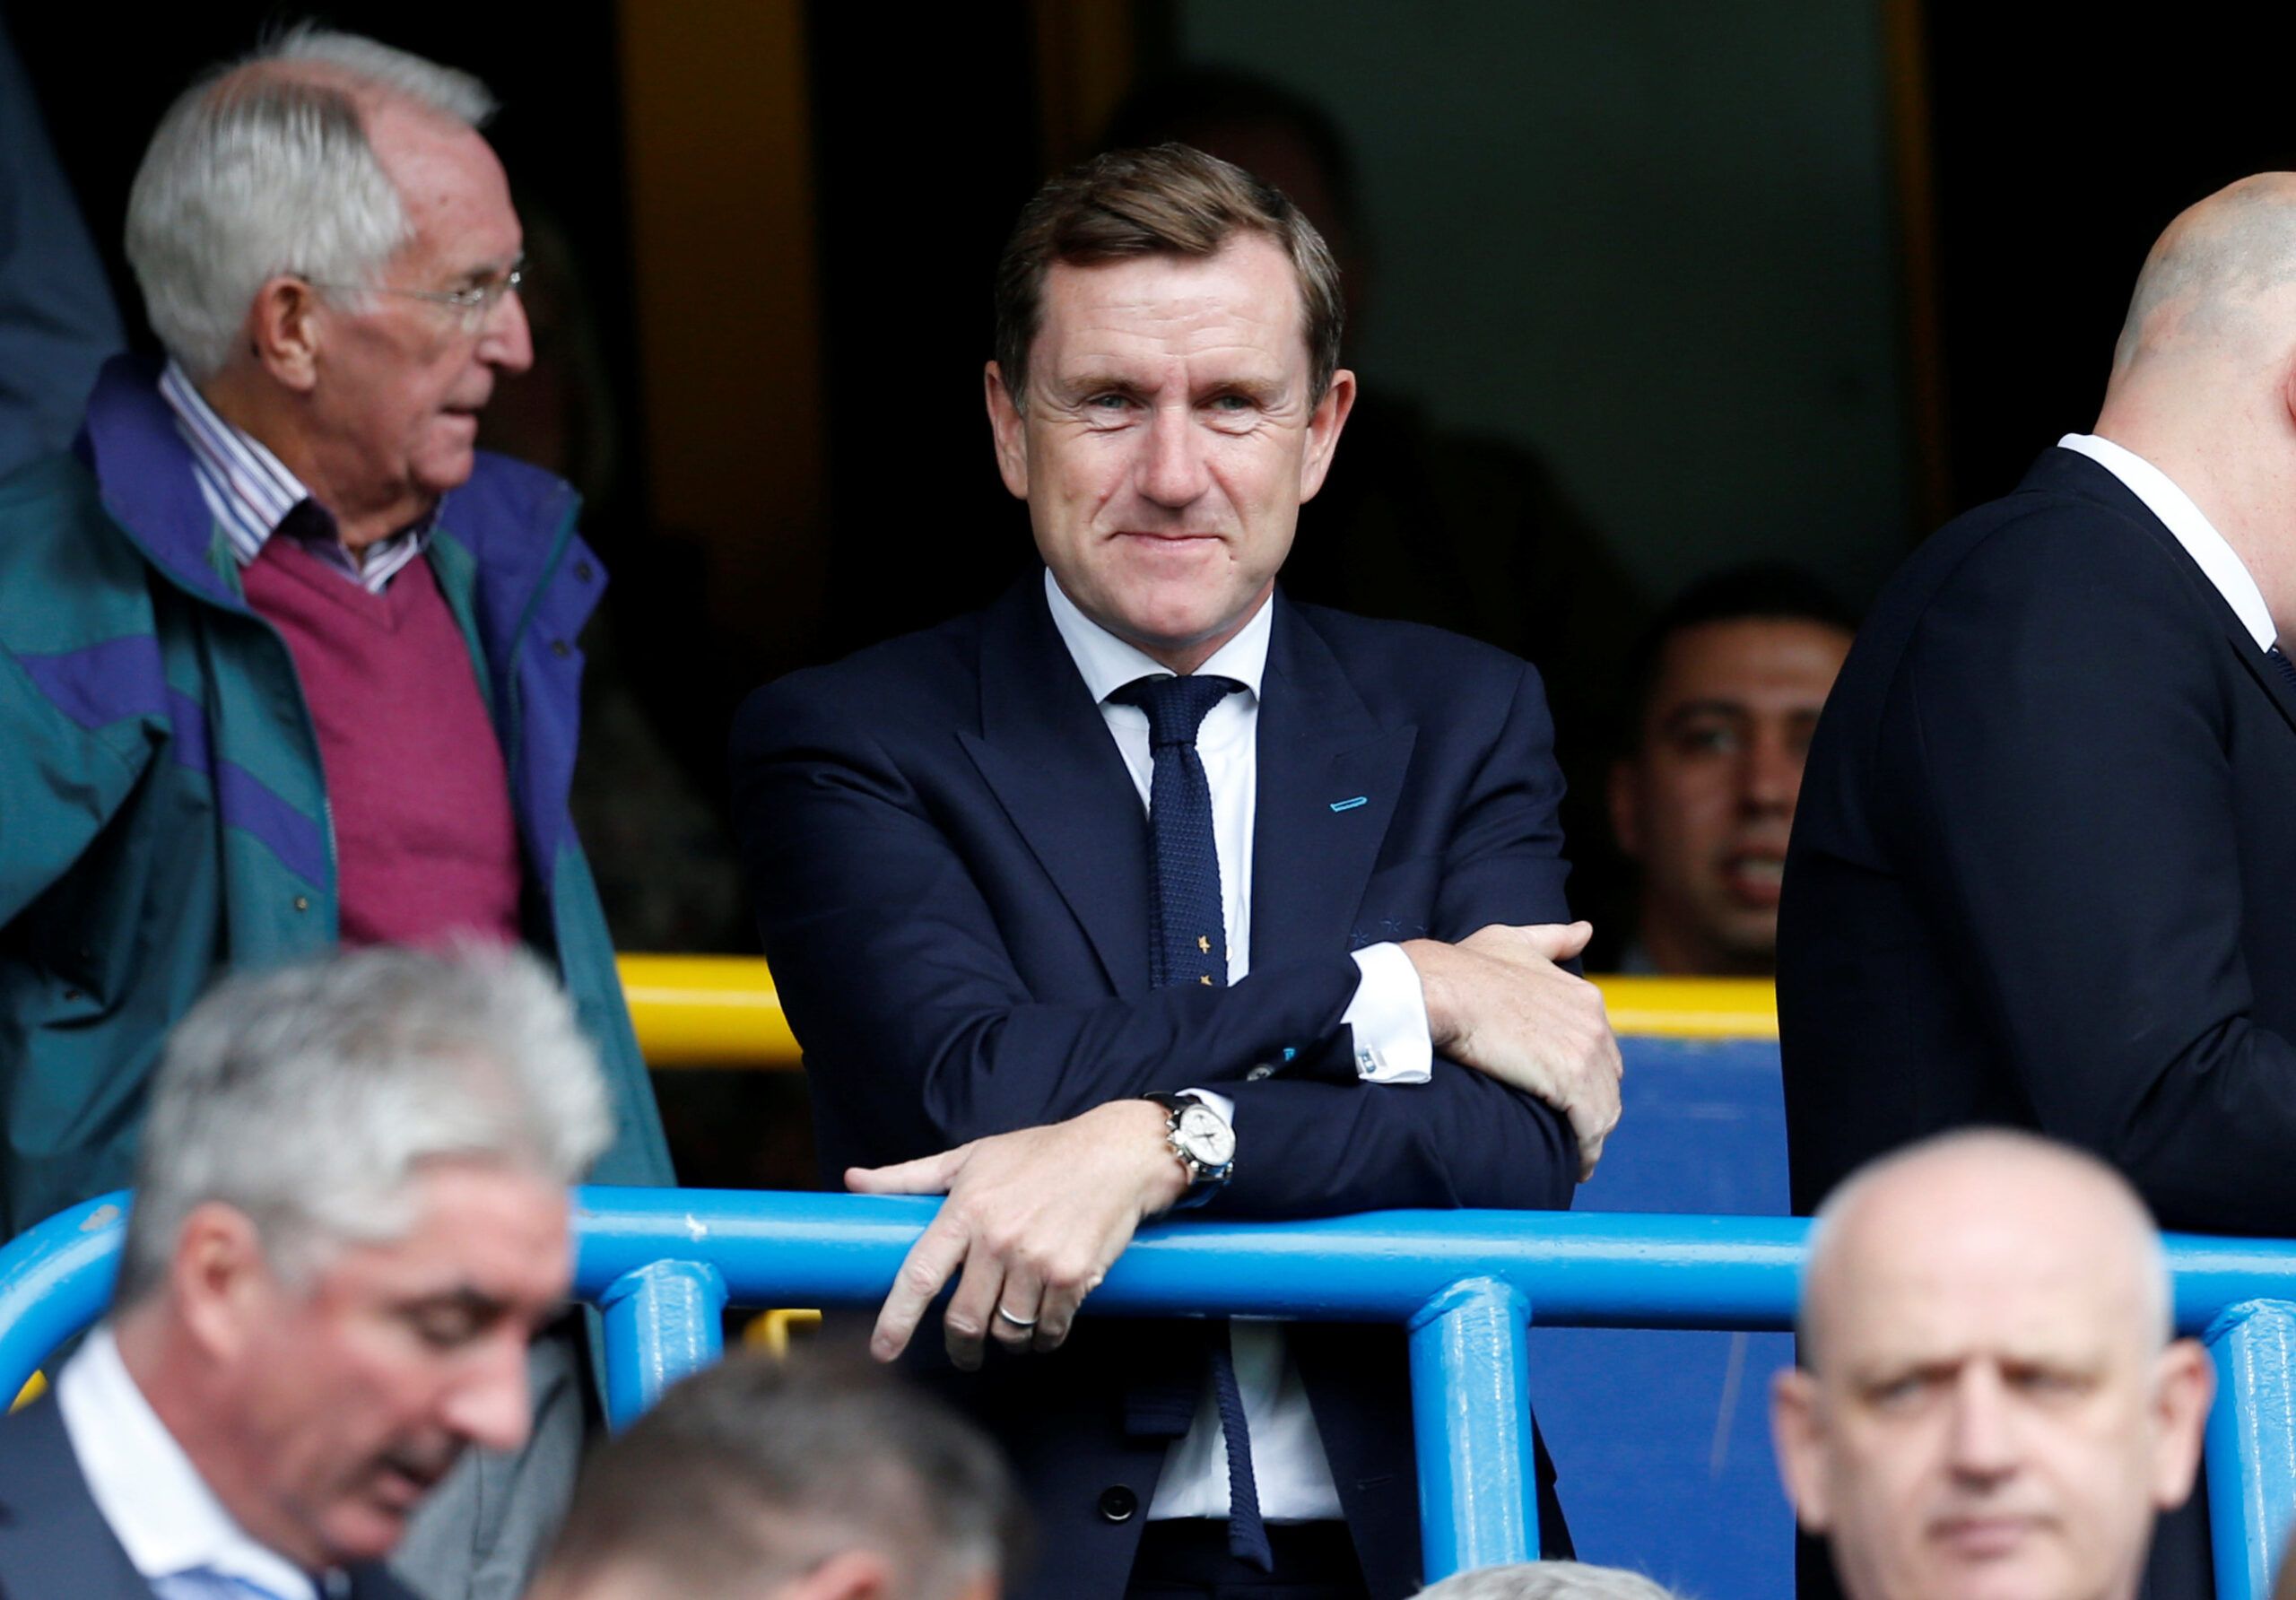 Soccer Football - Premier League - Huddersfield Town vs Leicester City - Kirklees Stadium, Huddersfield, Britain - September 16, 2017  Huddersfield Town chairman and owner Dean Hoyle   Action Images via Reuters/Ed Sykes    EDITORIAL USE ONLY. No use with unauthorized audio, video, data, fixture lists, club/league logos or 